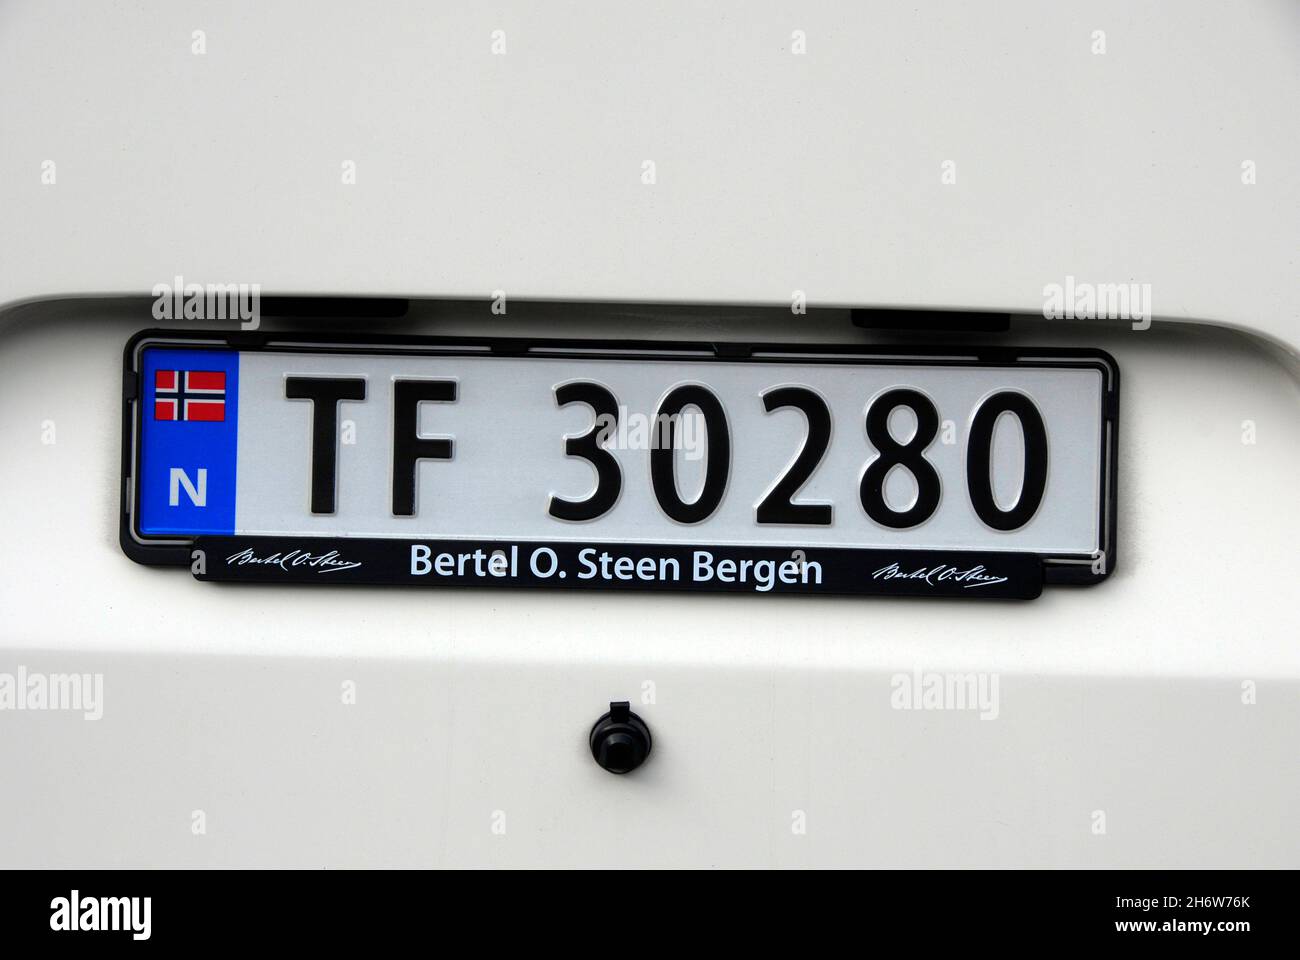 Registration number plate on vehicle, Norway Stock Photo